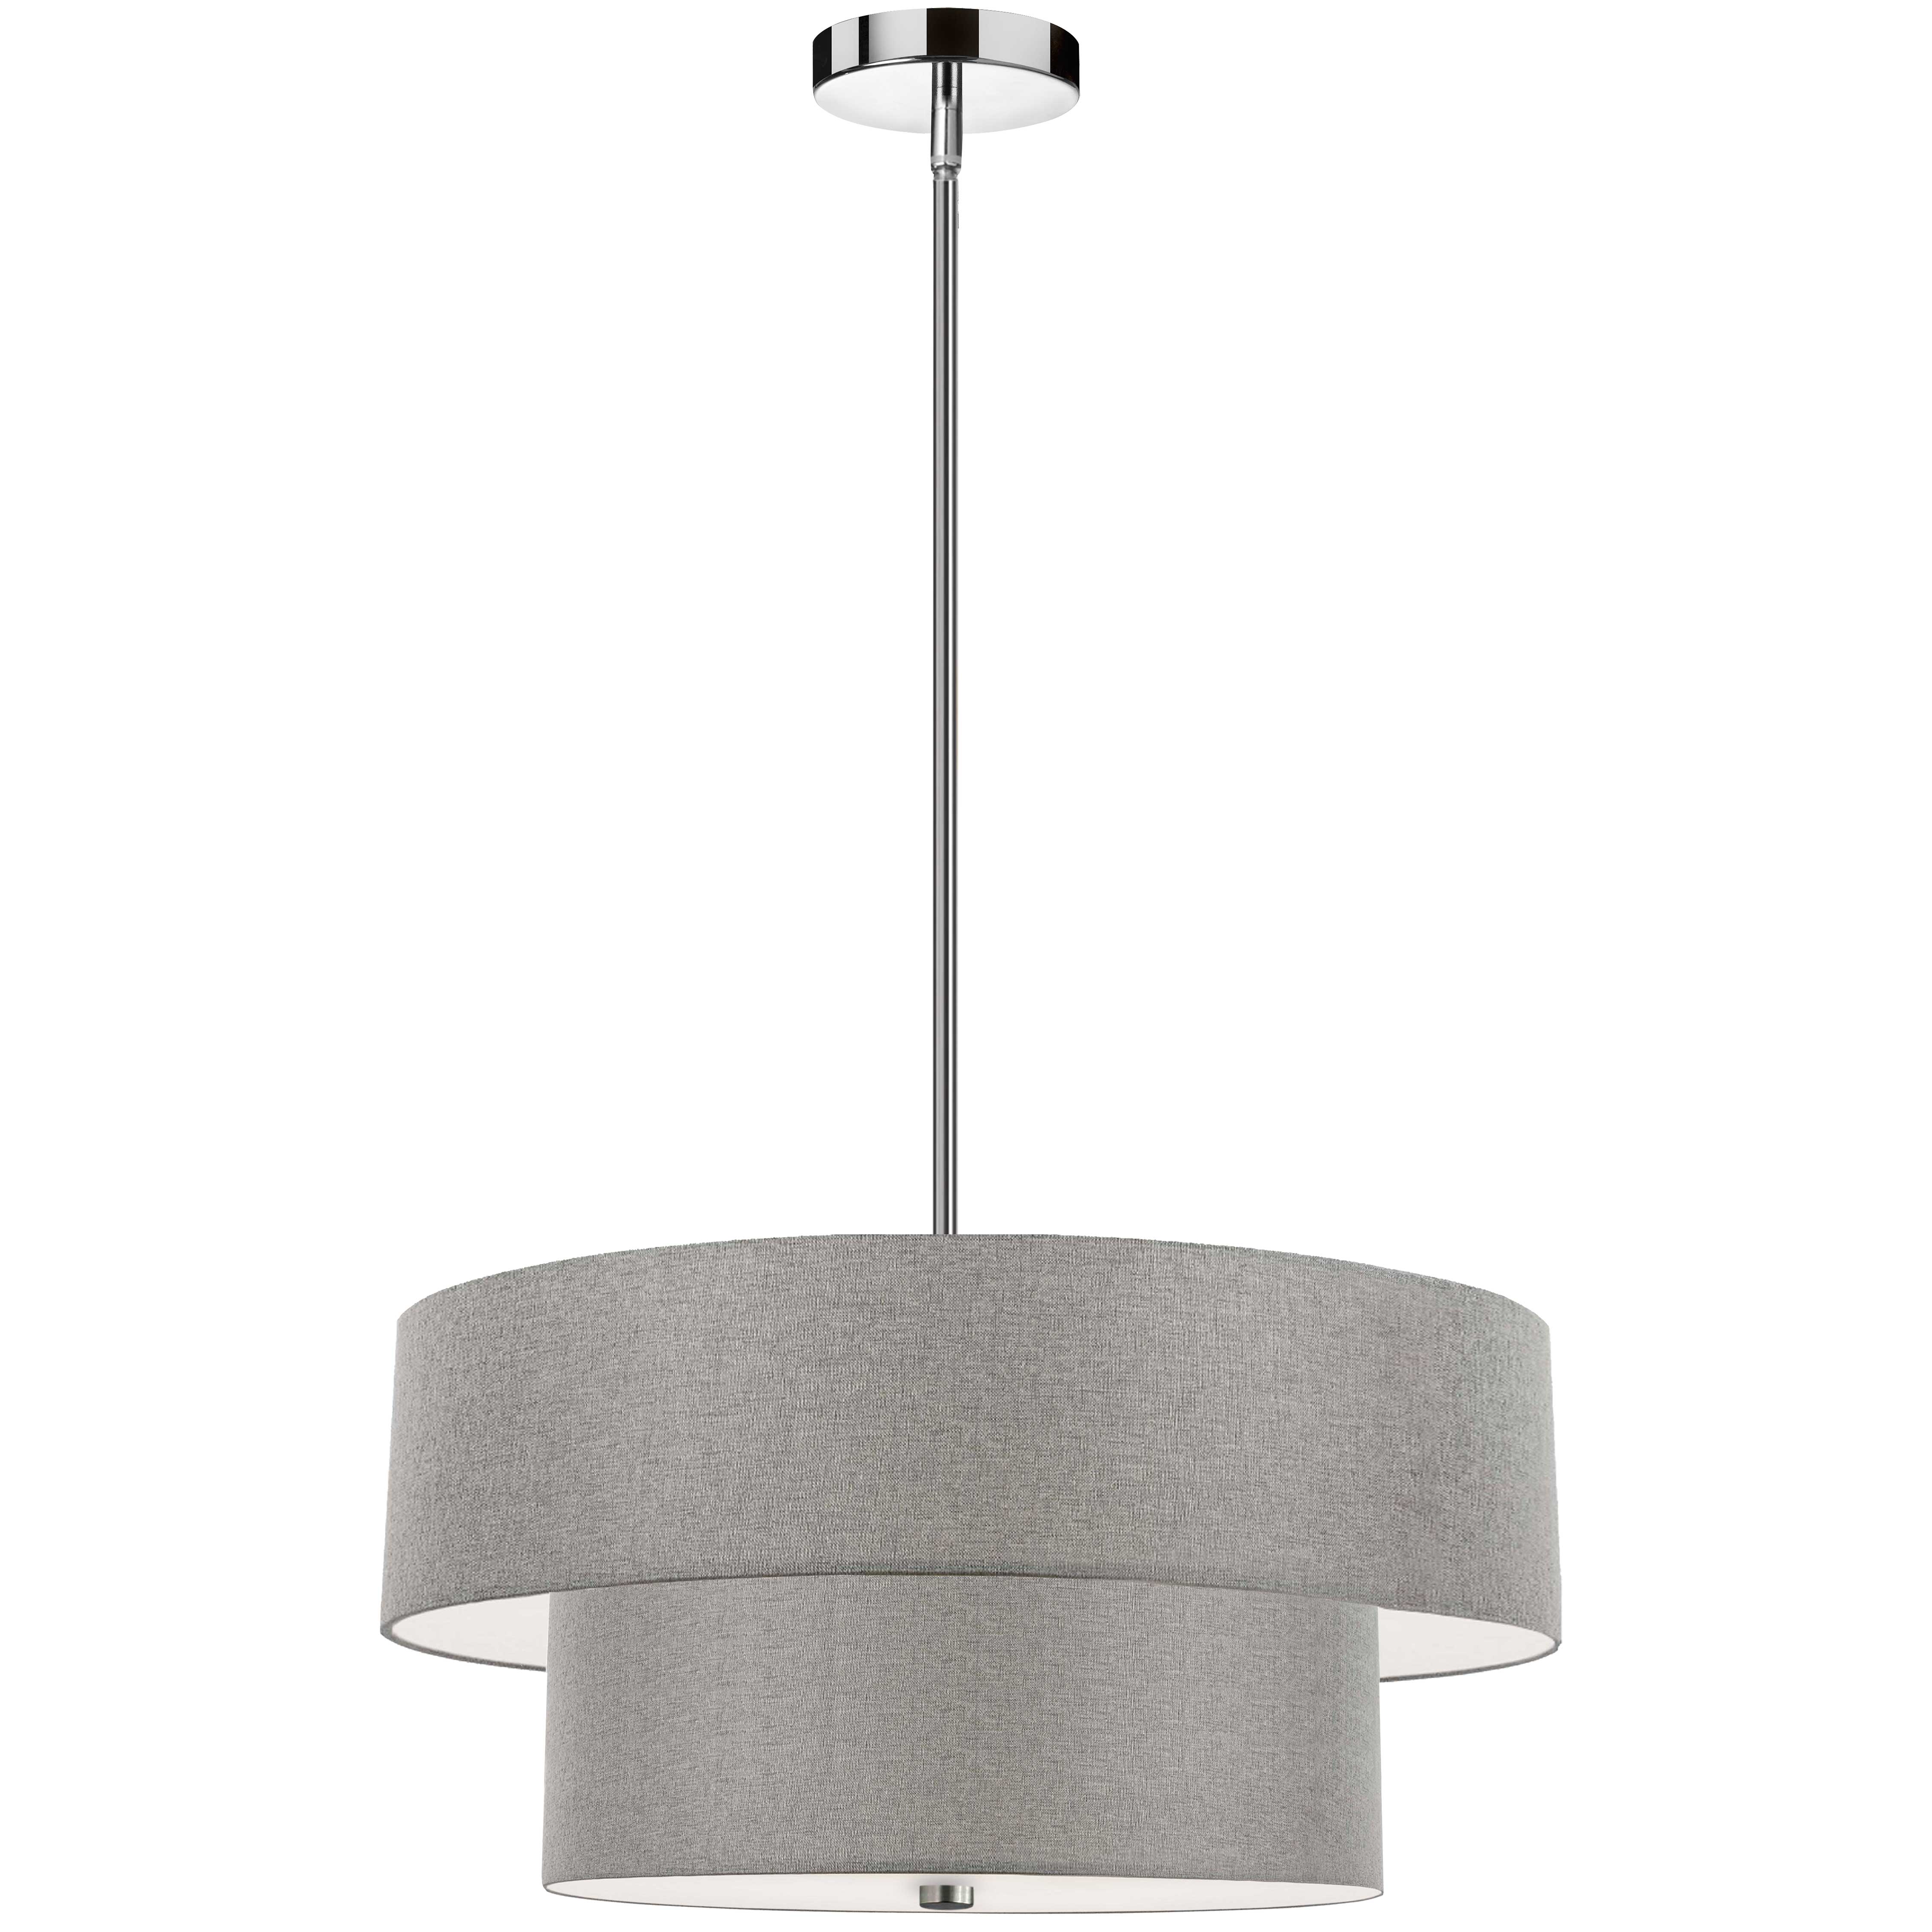 4LT Incand 2 Tier Pendant, PC w/ GRY Shade